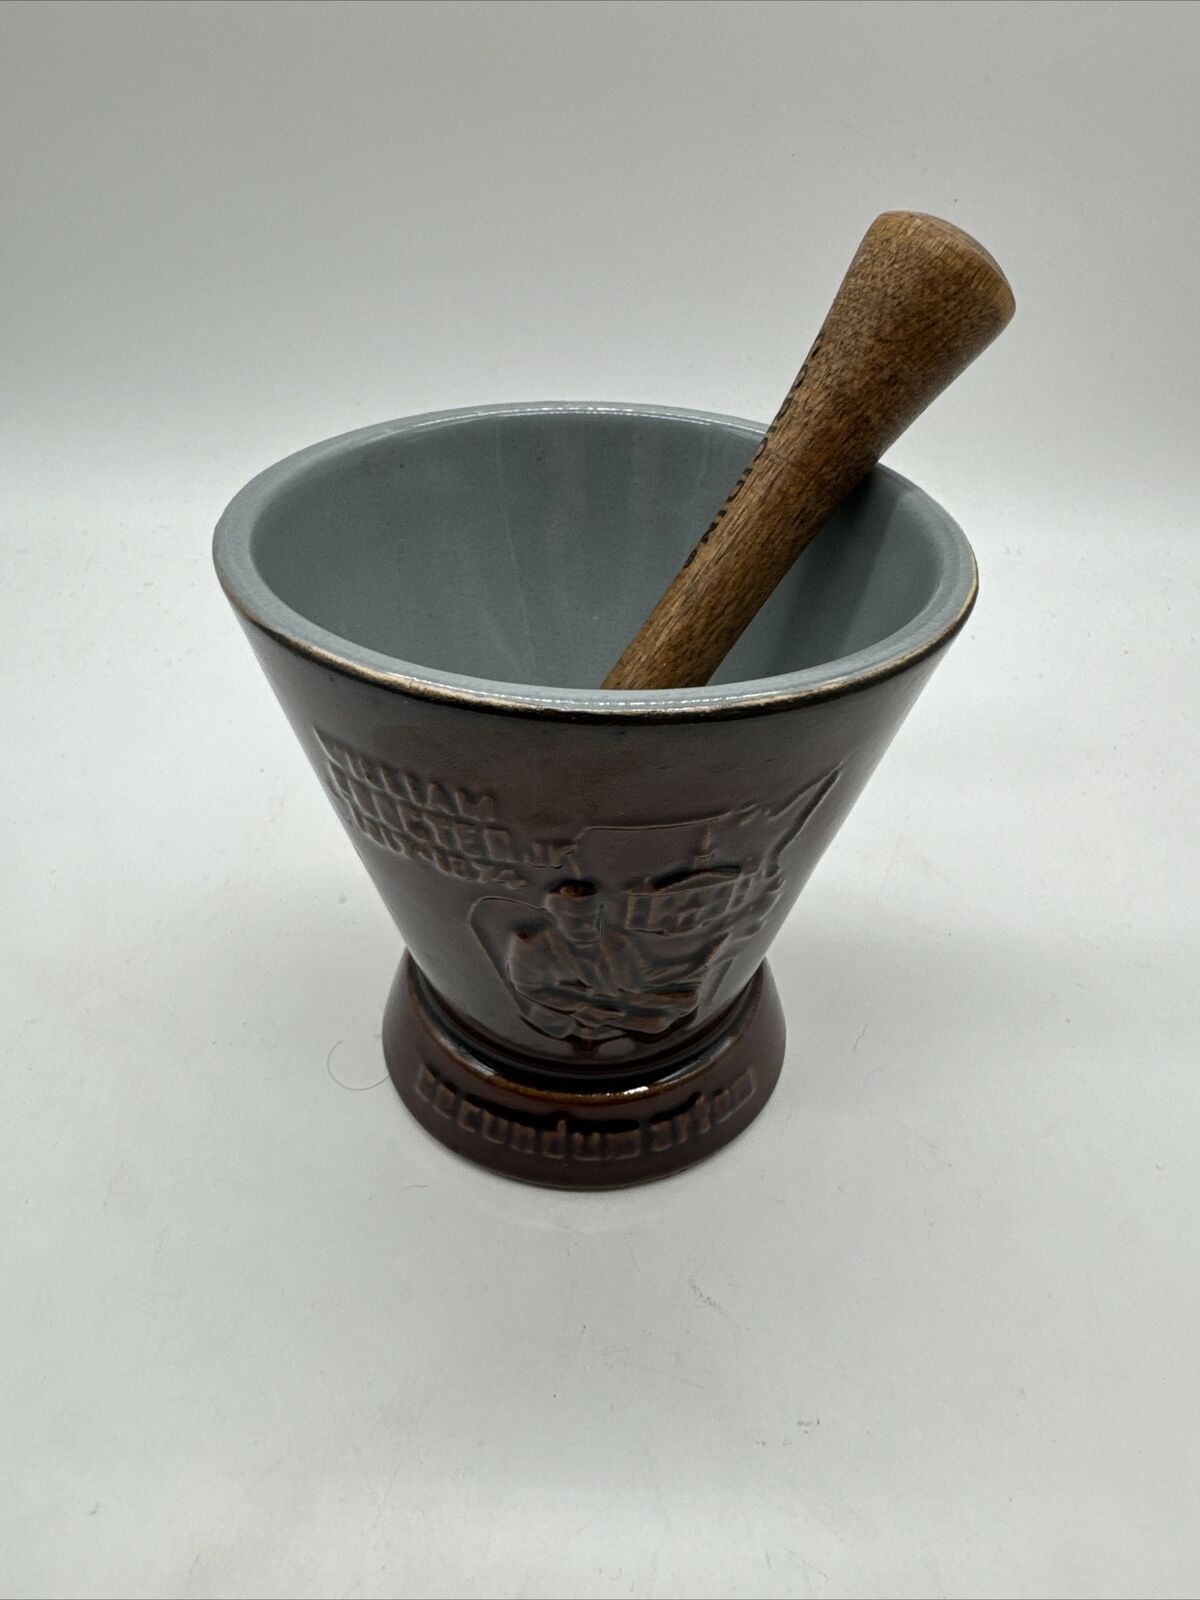 Vintage SCHERING Brown Ceramic Mortar Apothecary Pharmacy RX With Pestle